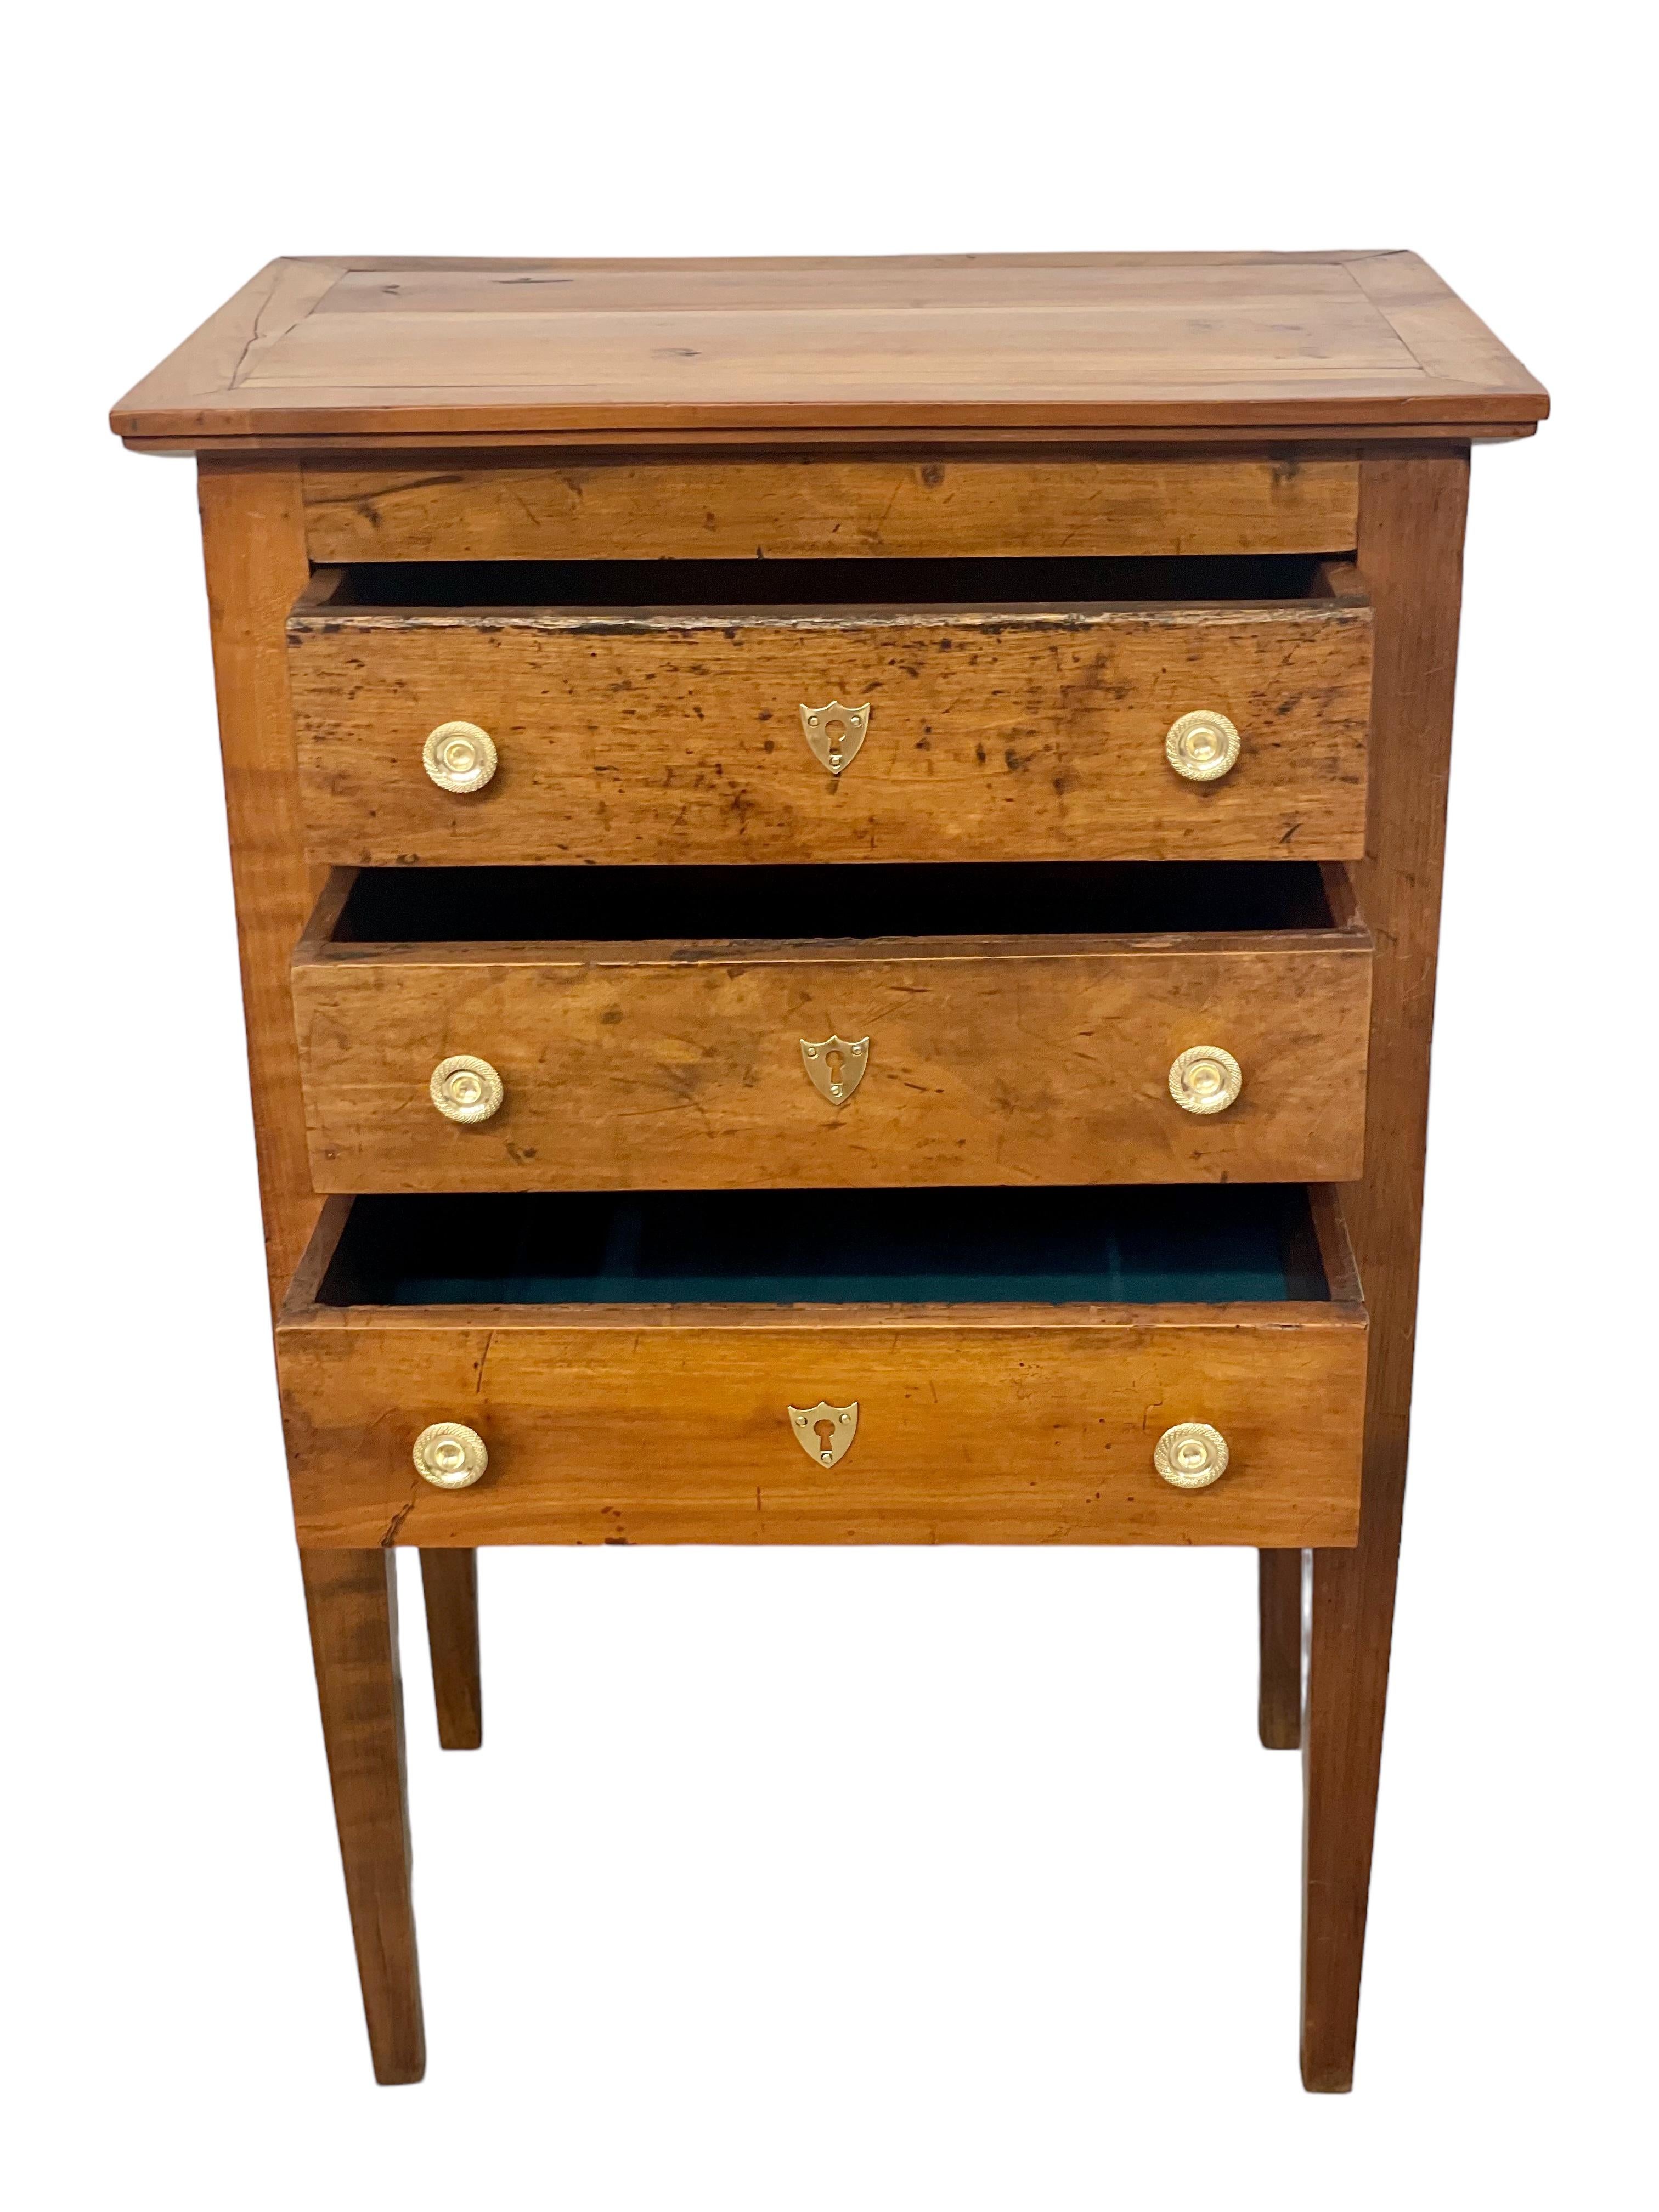 19th Century French Walnut Chest of Drawers or 'Chiffonnier' For Sale 15